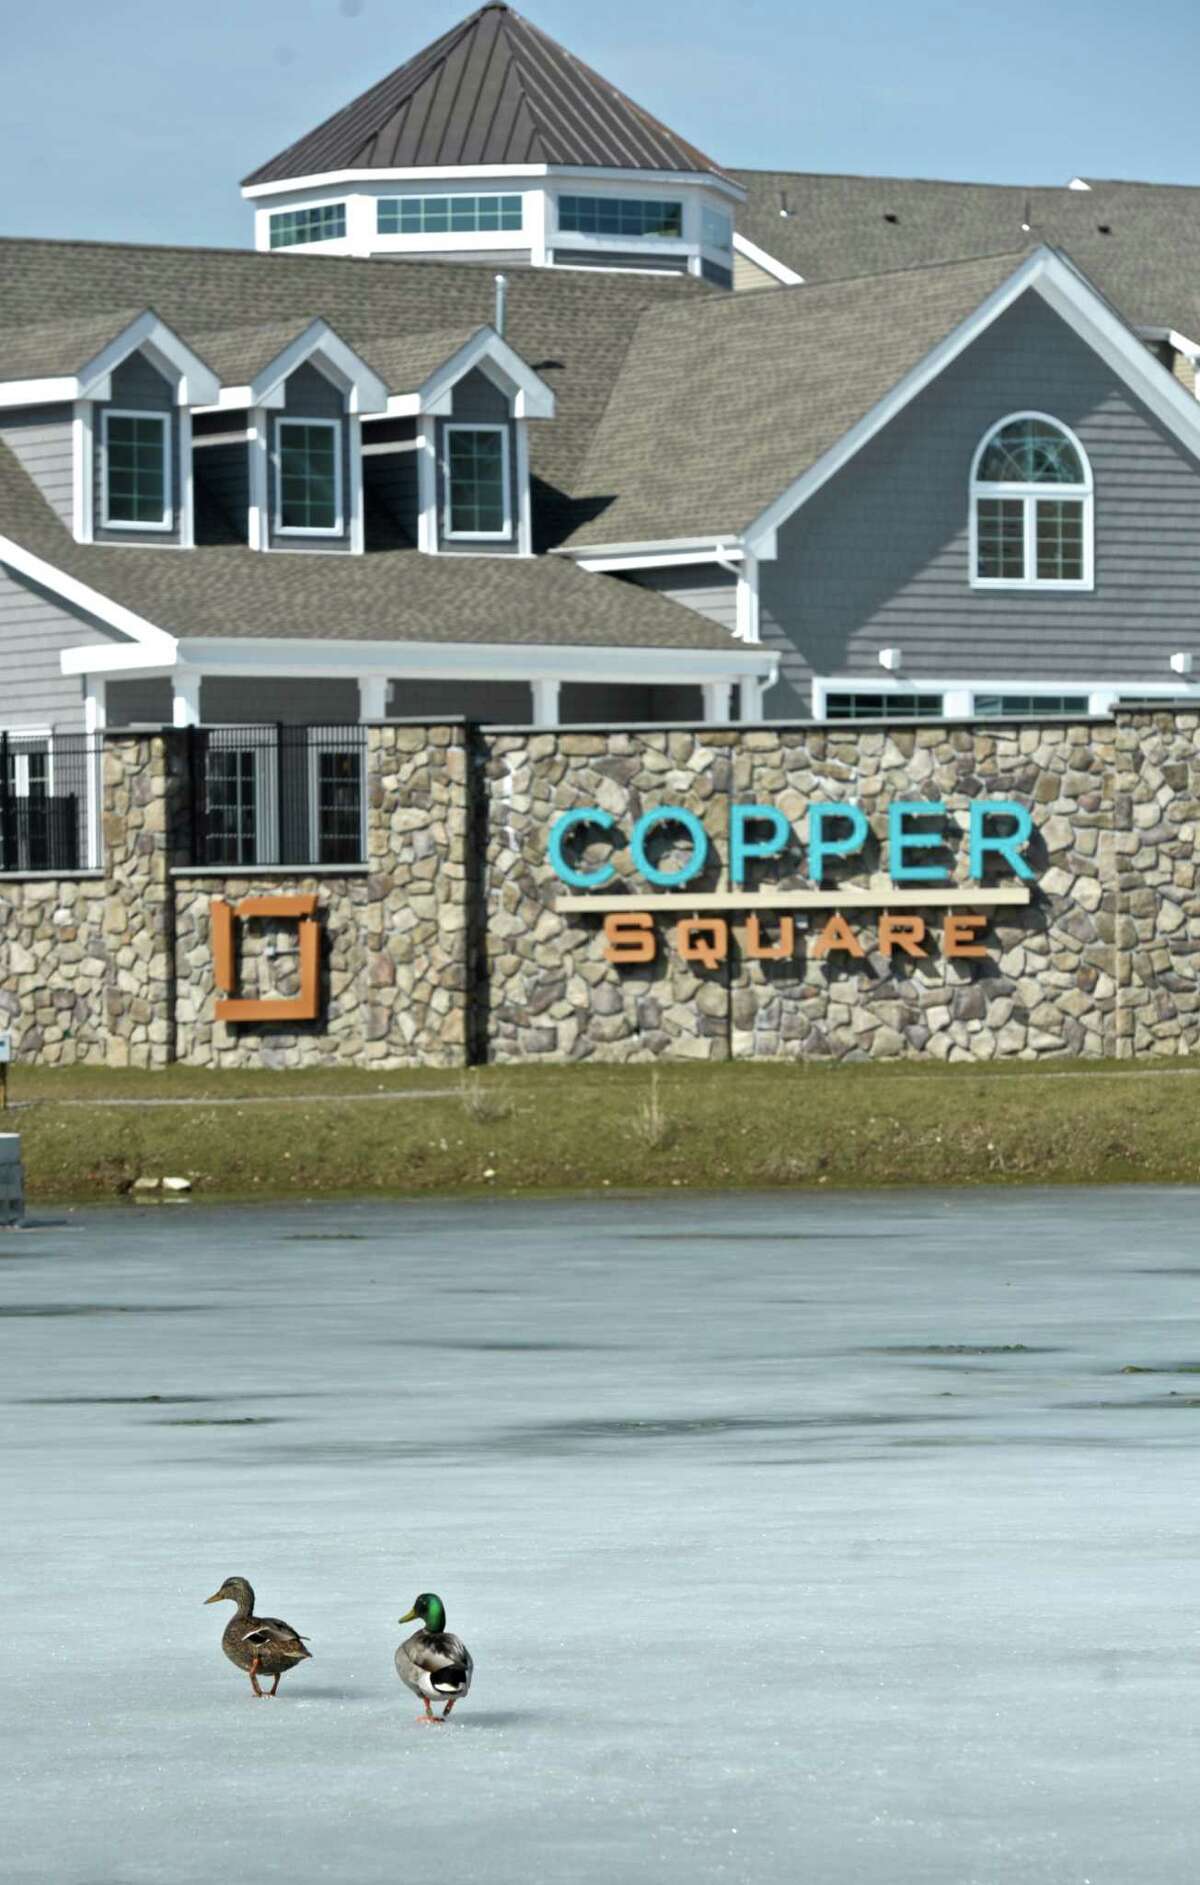 two ducks walk on the ice covered pond in front of the Cooper Square complex, in the Stony Hill section of Bethel, which is being developed by Stamford based RMS Companies. RMS has proposed a new hotel for the west side of Danbury. Thursday, April 2, 2015, Bethel, Conn.